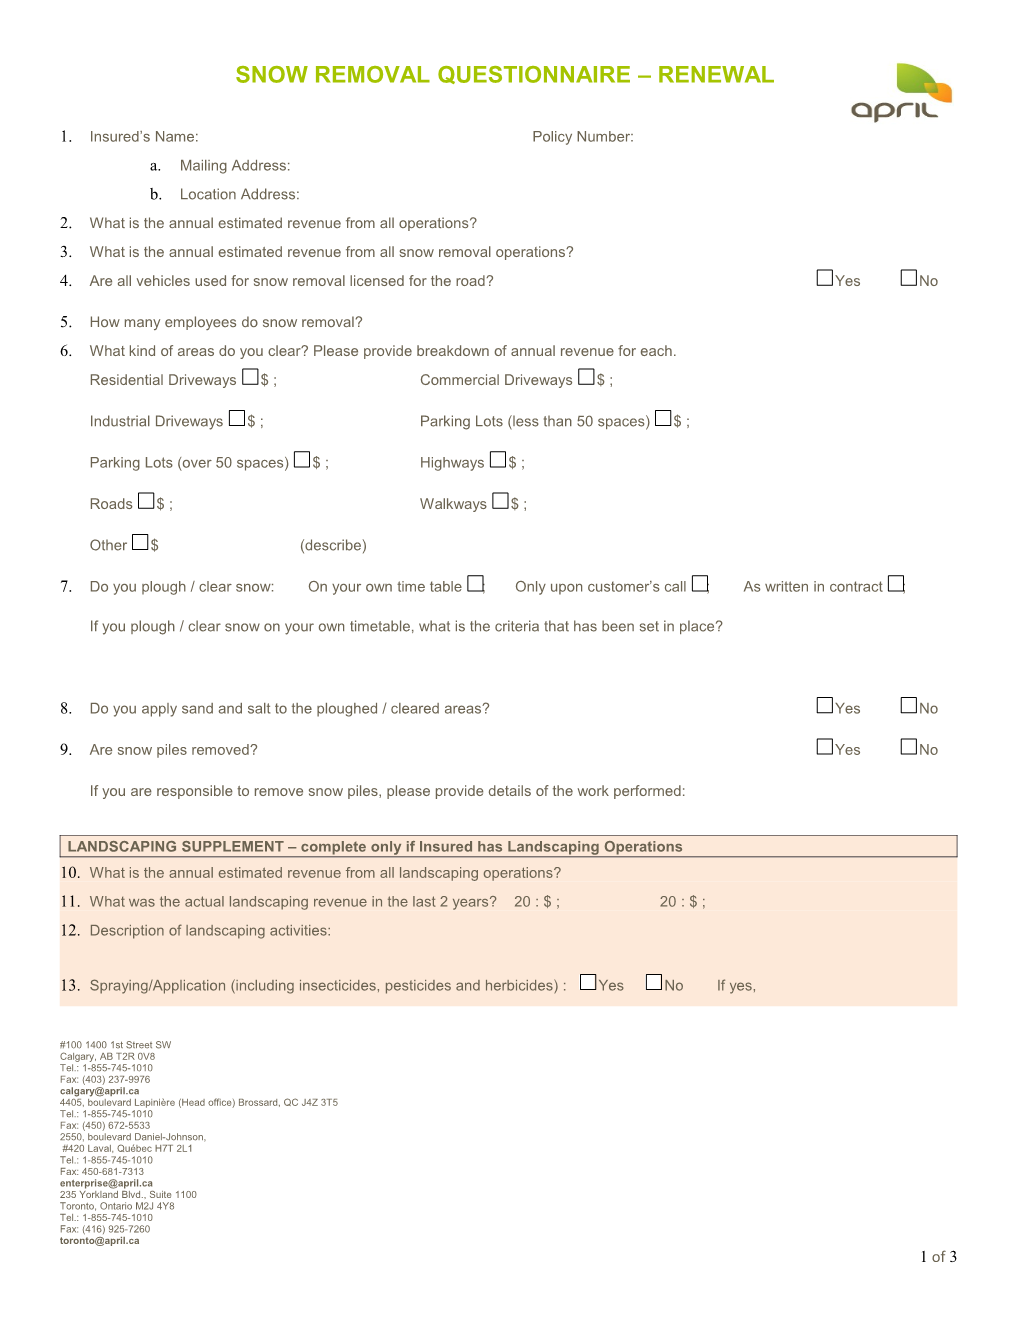 Snow Removal Questionnaire Renewal